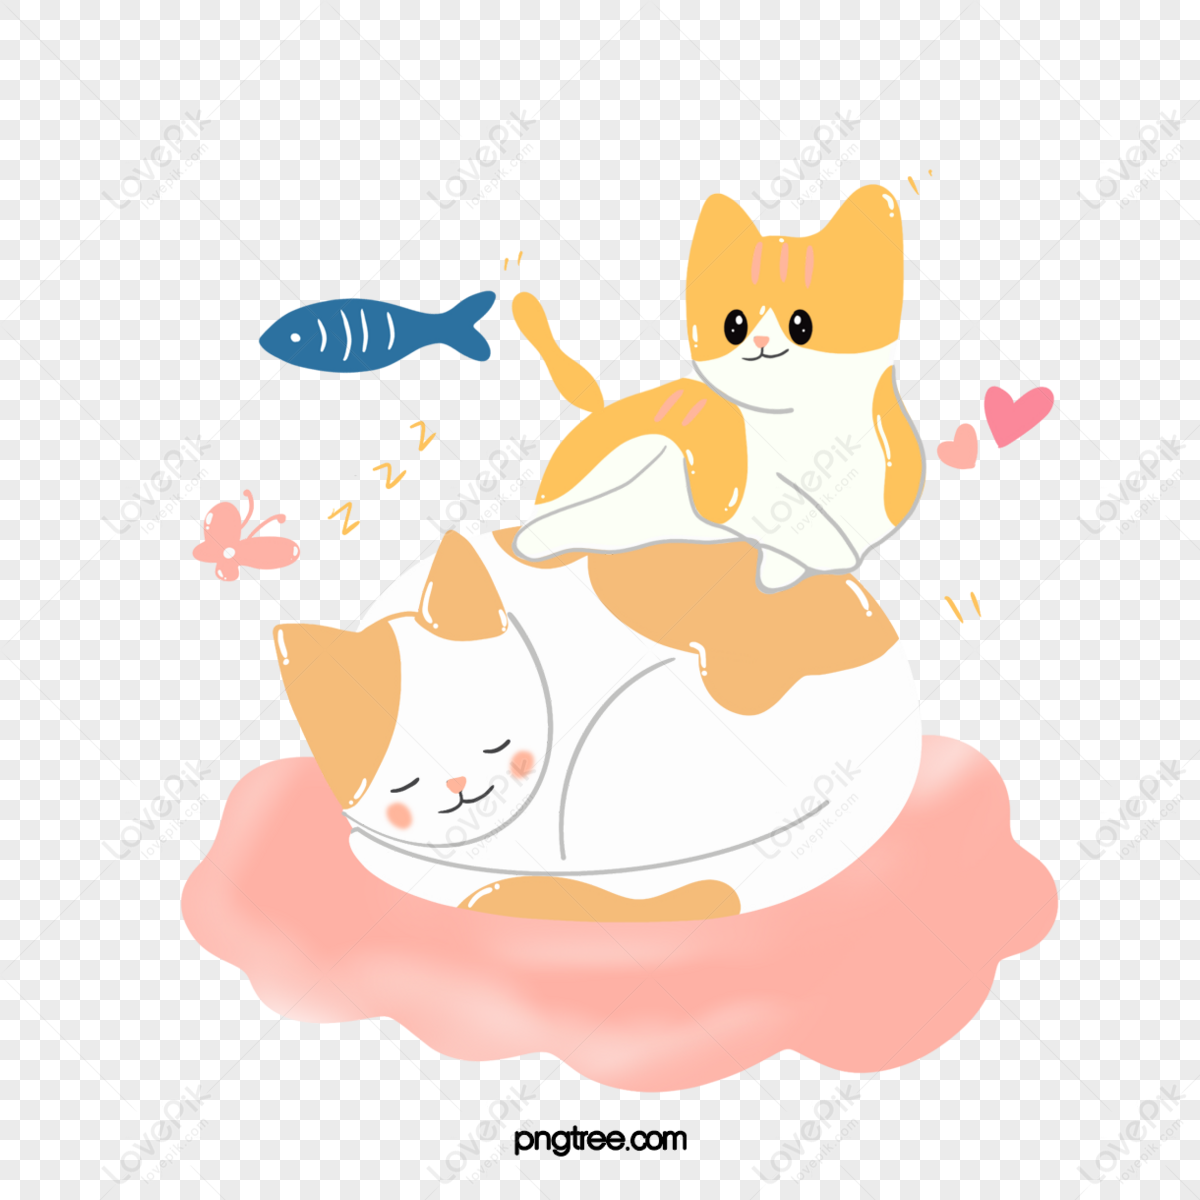 Cat Sleeping Cartoon PNG Images With Transparent Background | Free ...